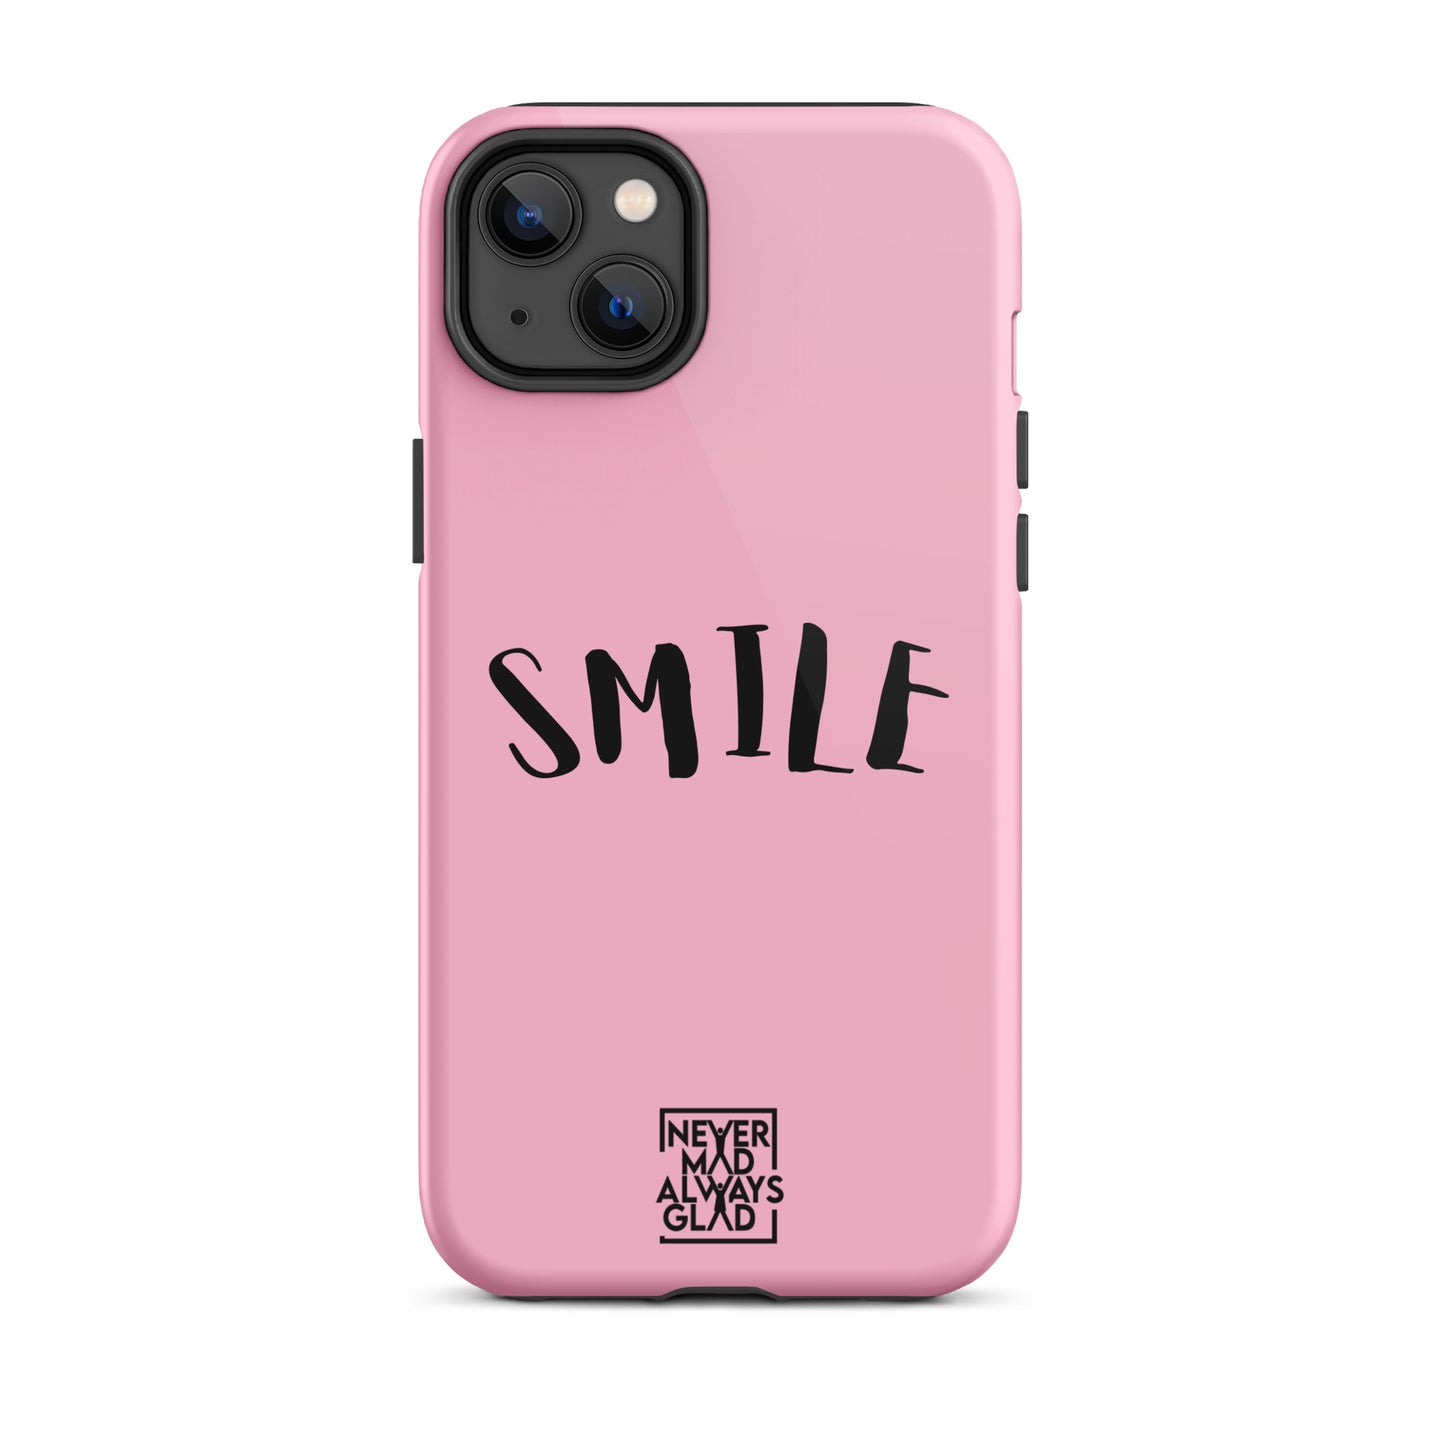 NMAG SMILE PINK Tough iPhone case